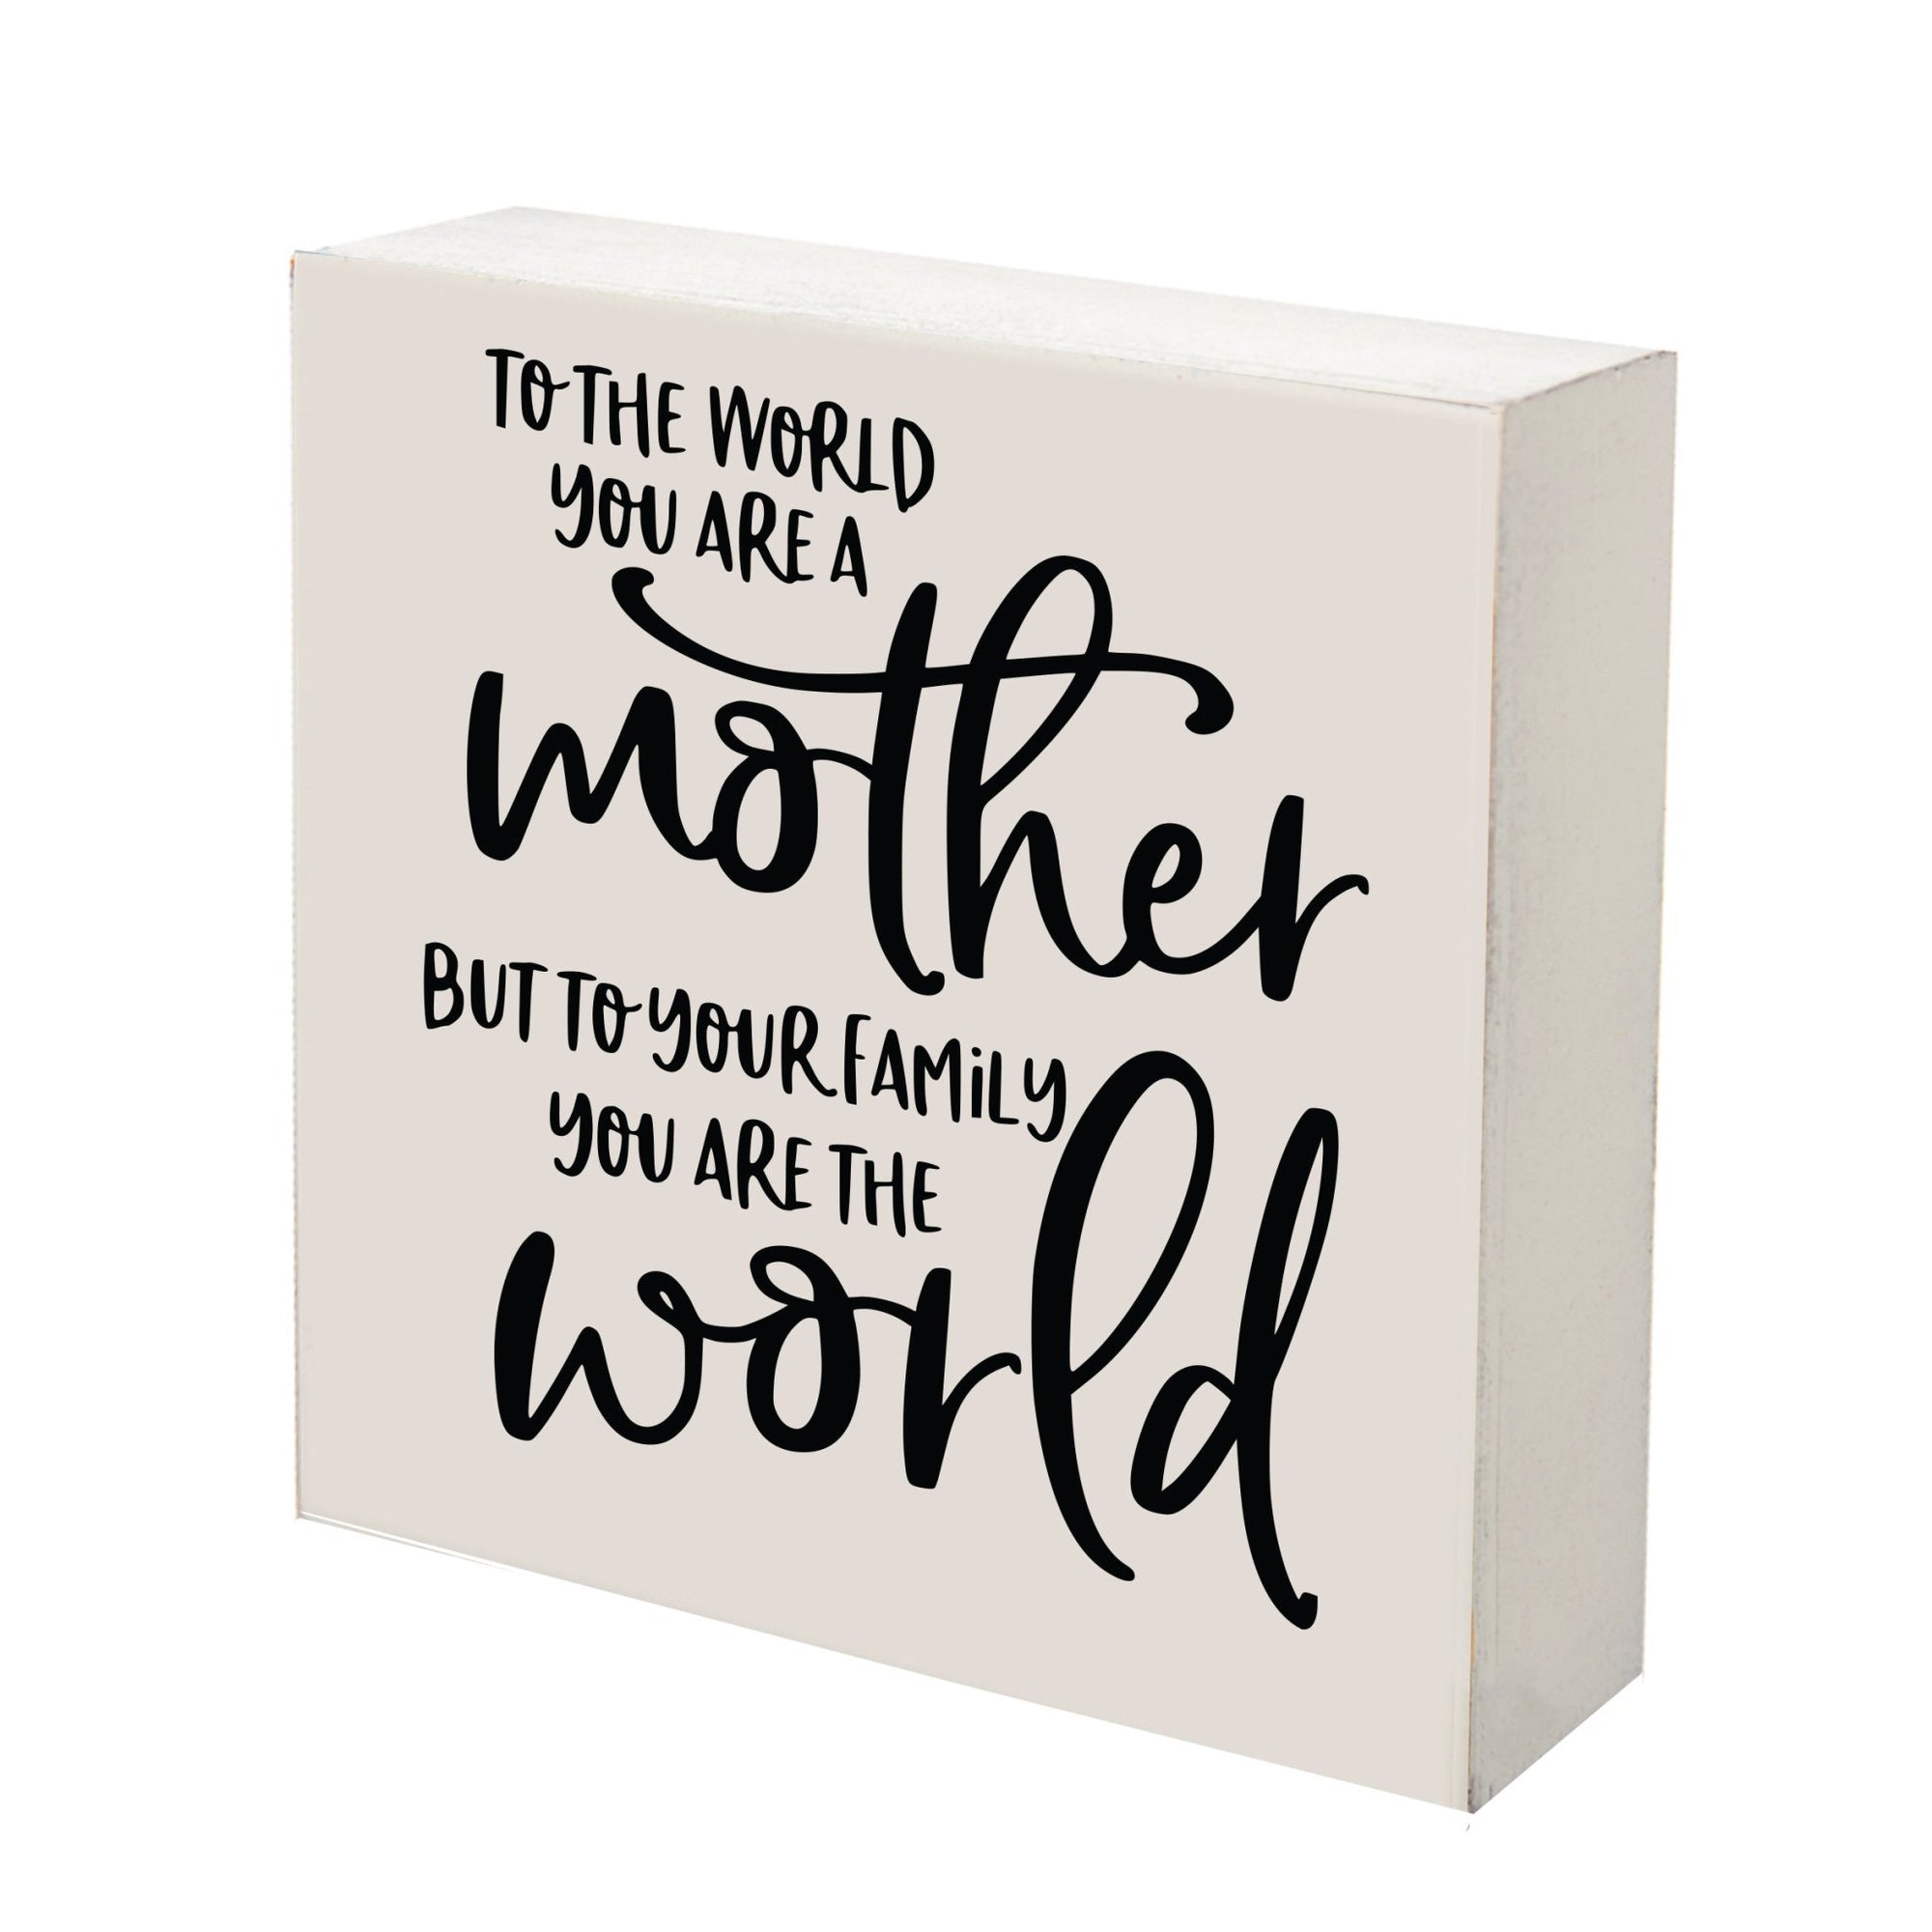 Modern Inspirational Shadow Box for Everyday Home Decorations For Mothers 6x6 - To The World You Are A Mother - LifeSong Milestones